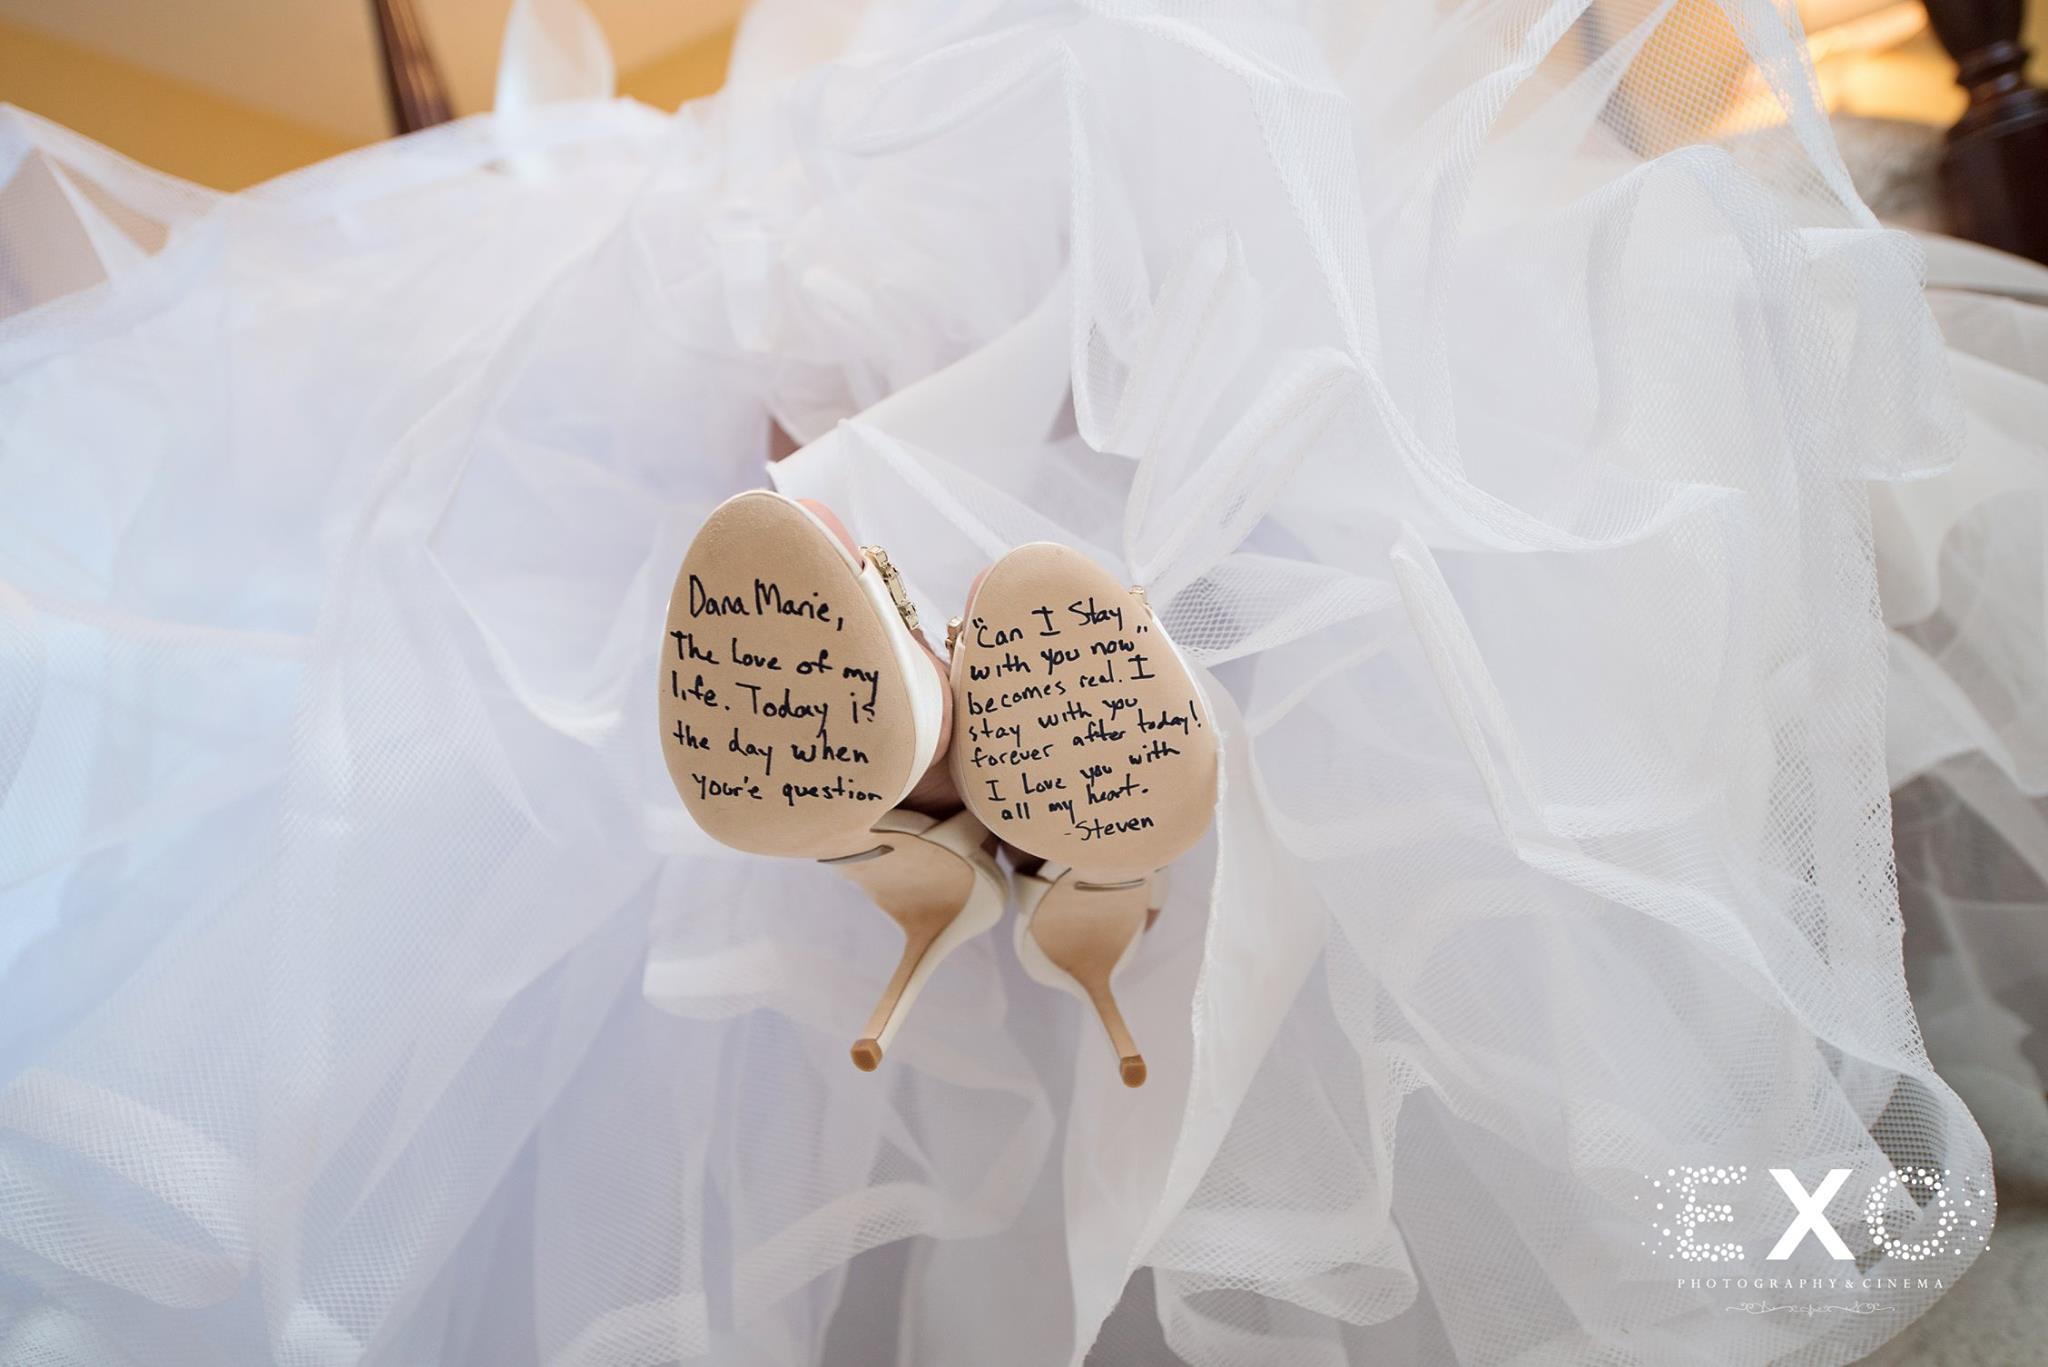 shot of brides shoes with message written